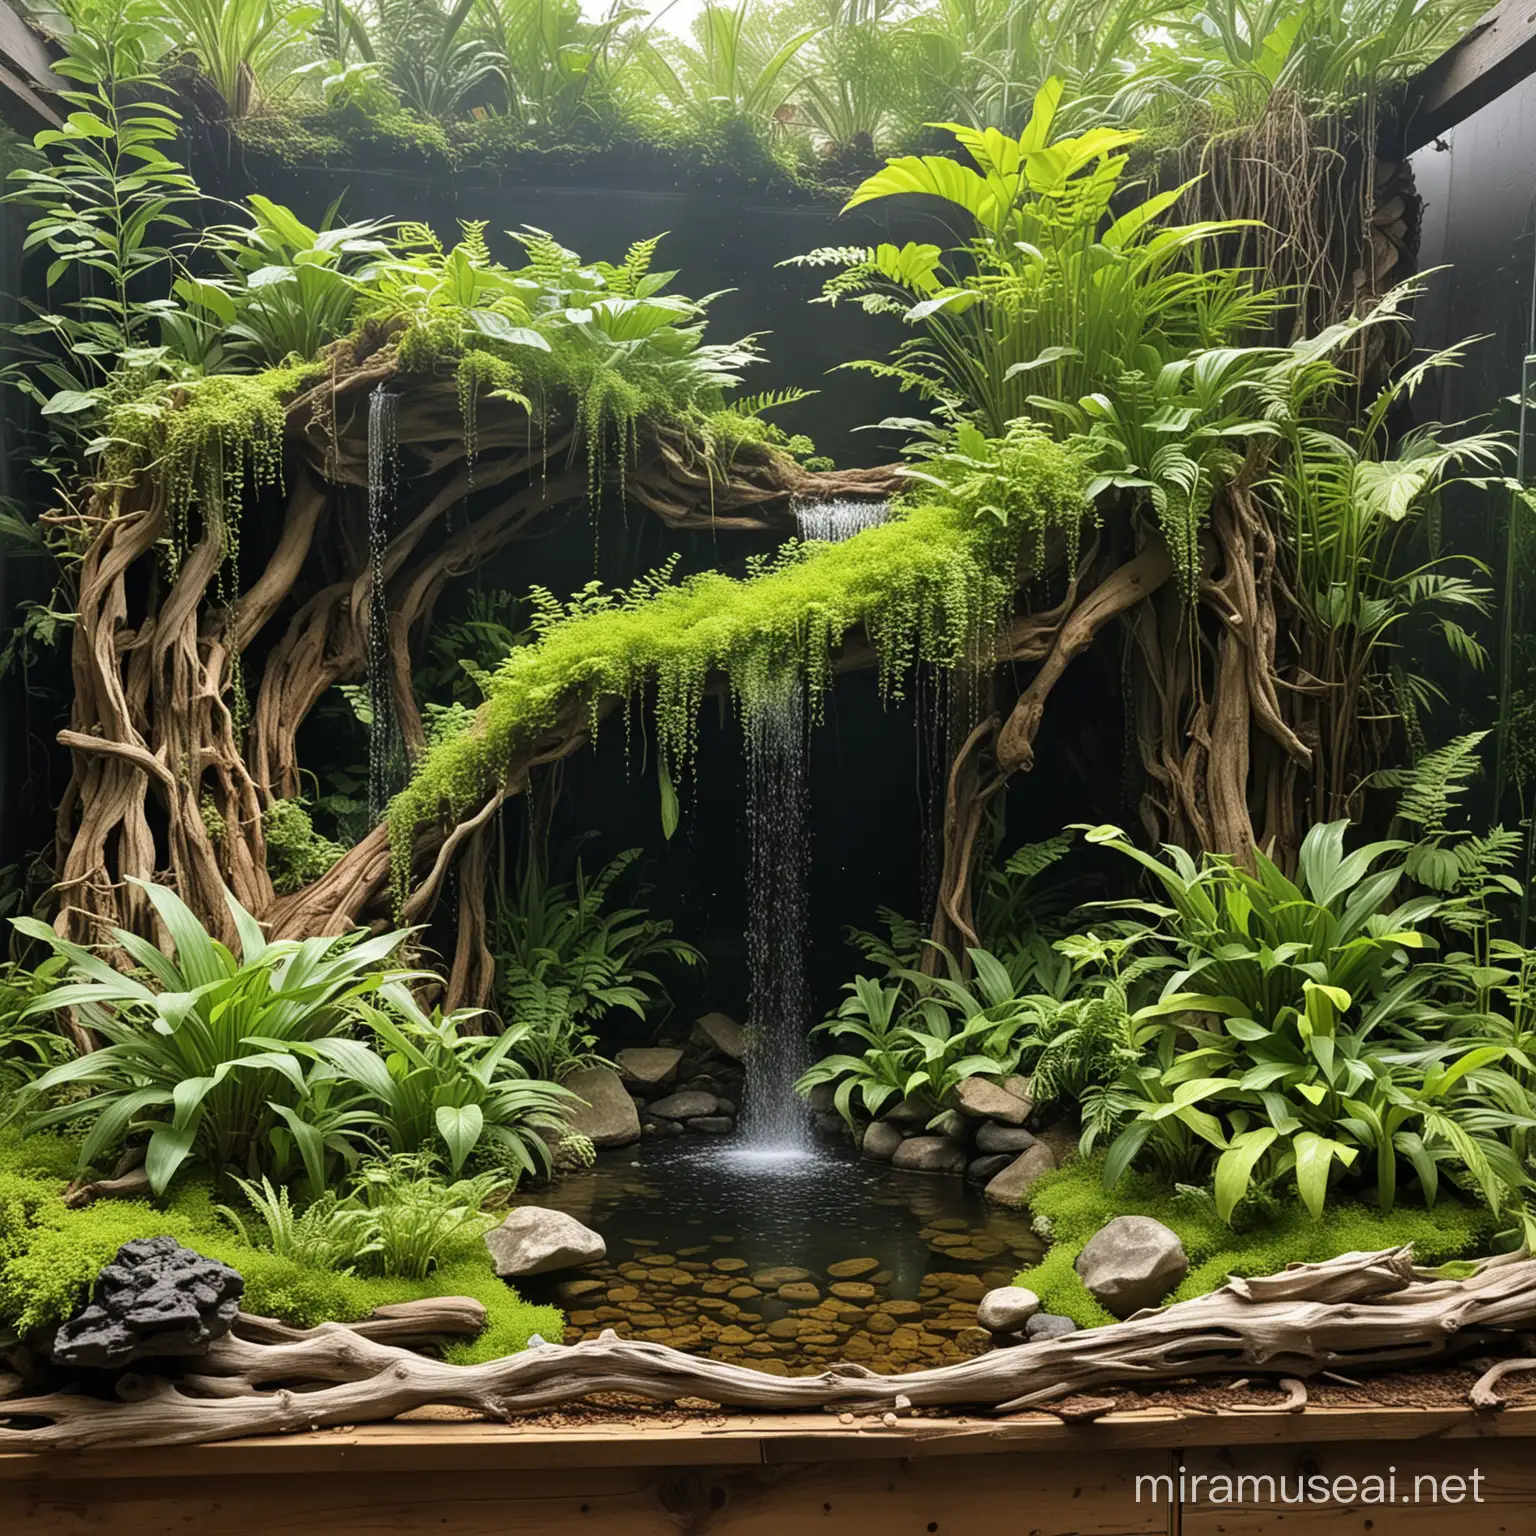 Rainforest paludarium with waterfall running from back to front, flows under the driftwood, sidewalls are filled with forest plants and vines